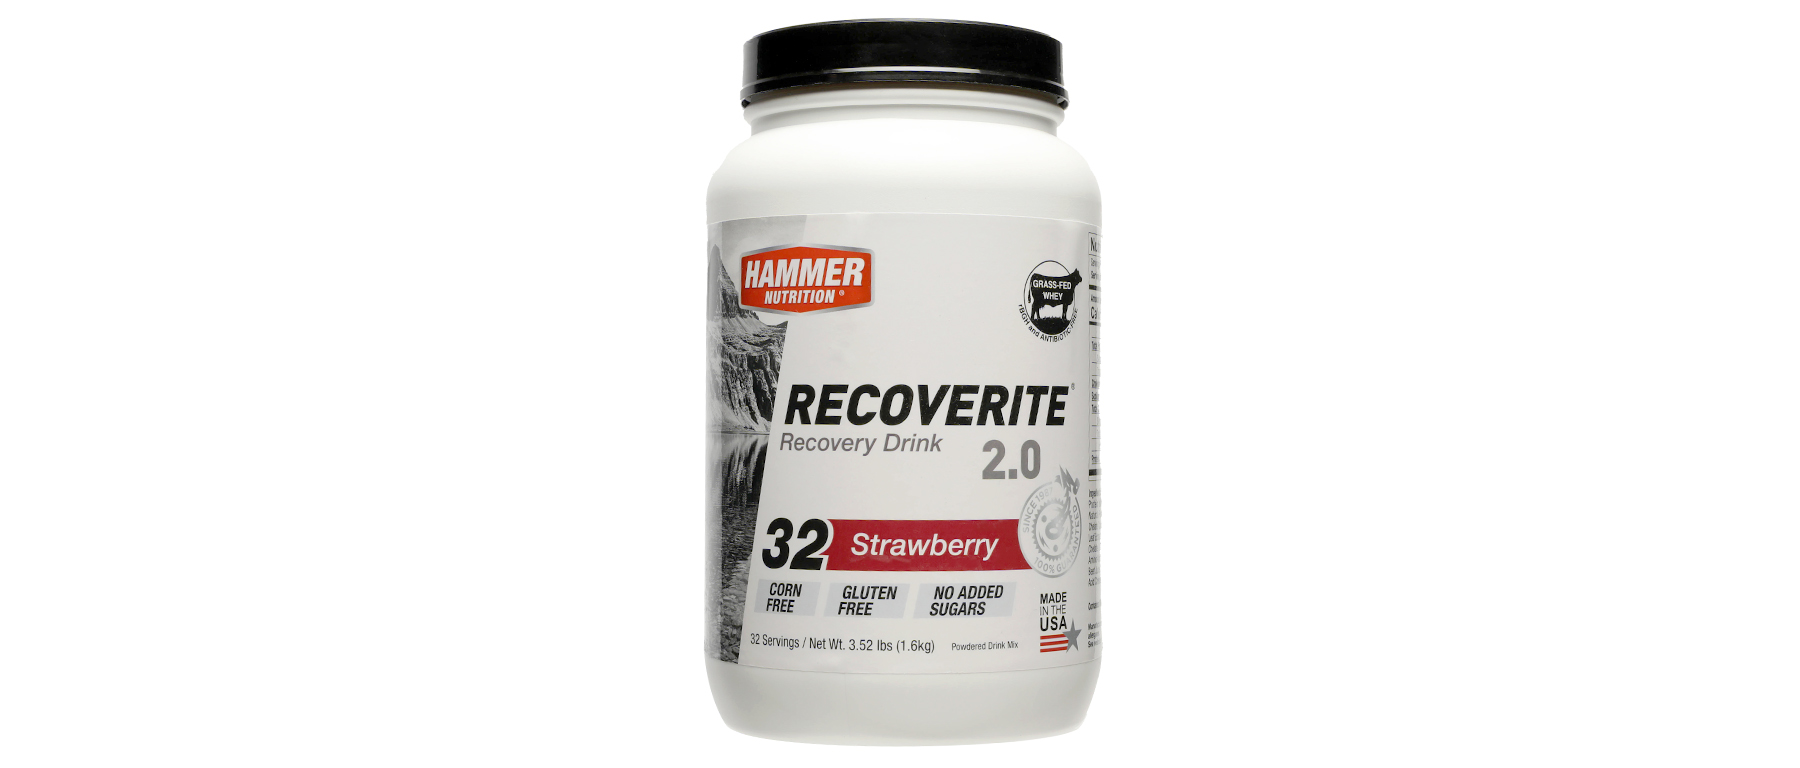 Hammer Recoverite 2.0 Drink Mix